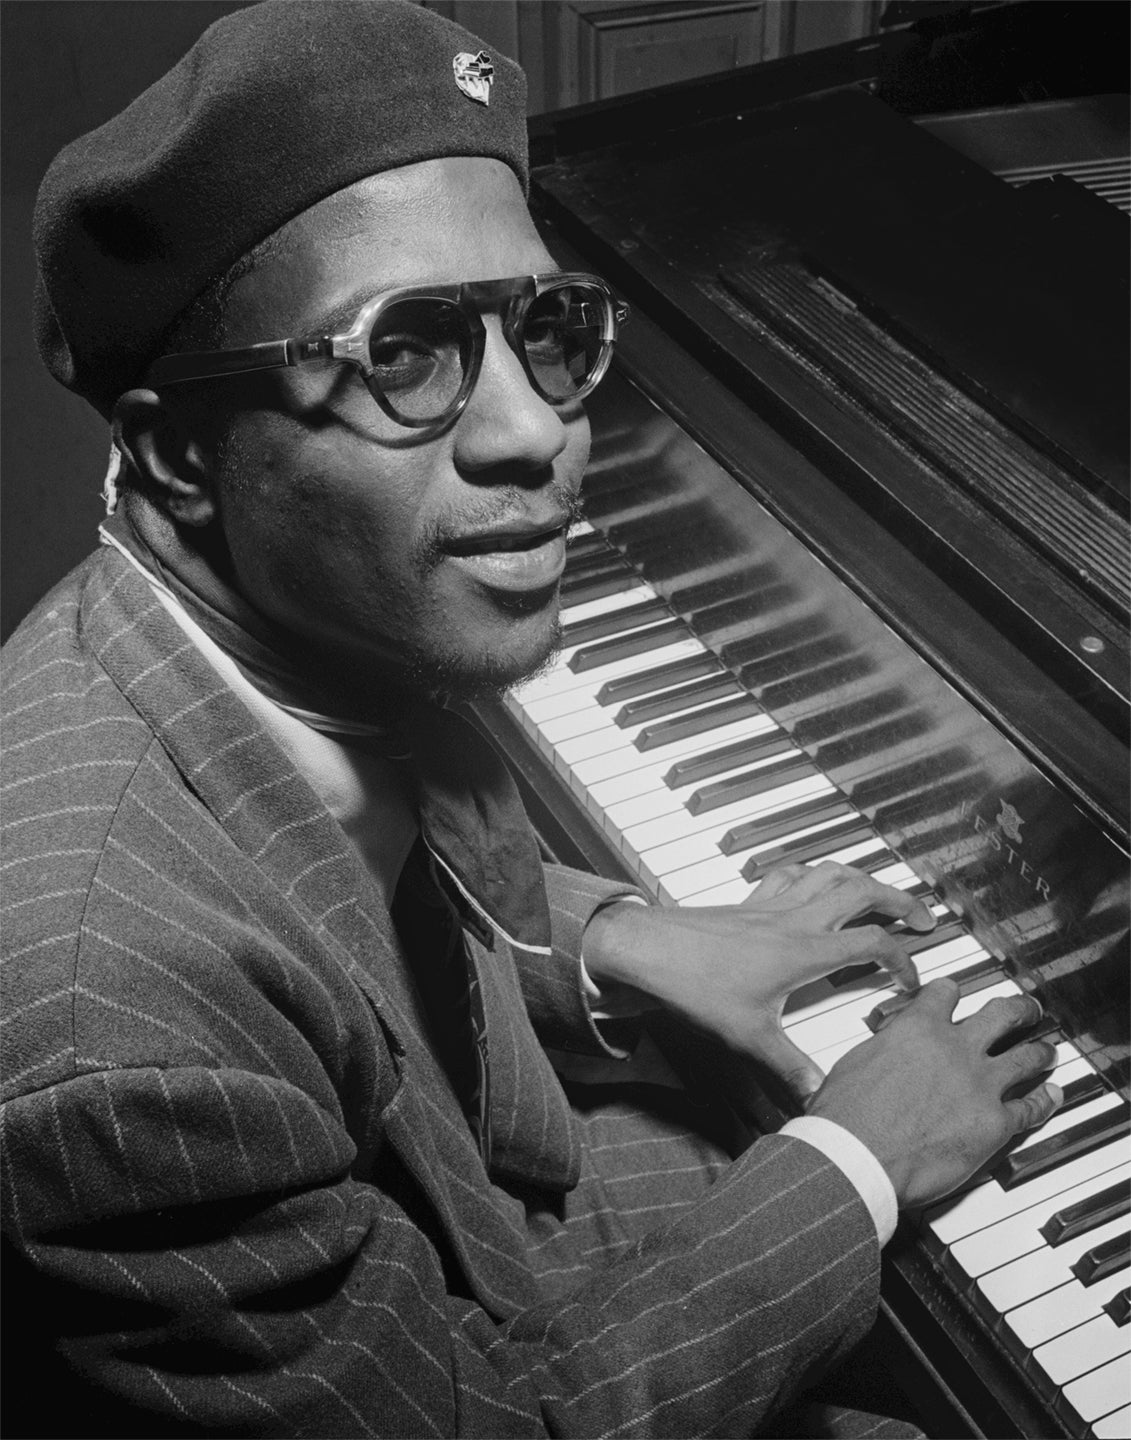 Thelonius Monk, Jazz Musician and Composer, Portrait, 1940s Historical Pix